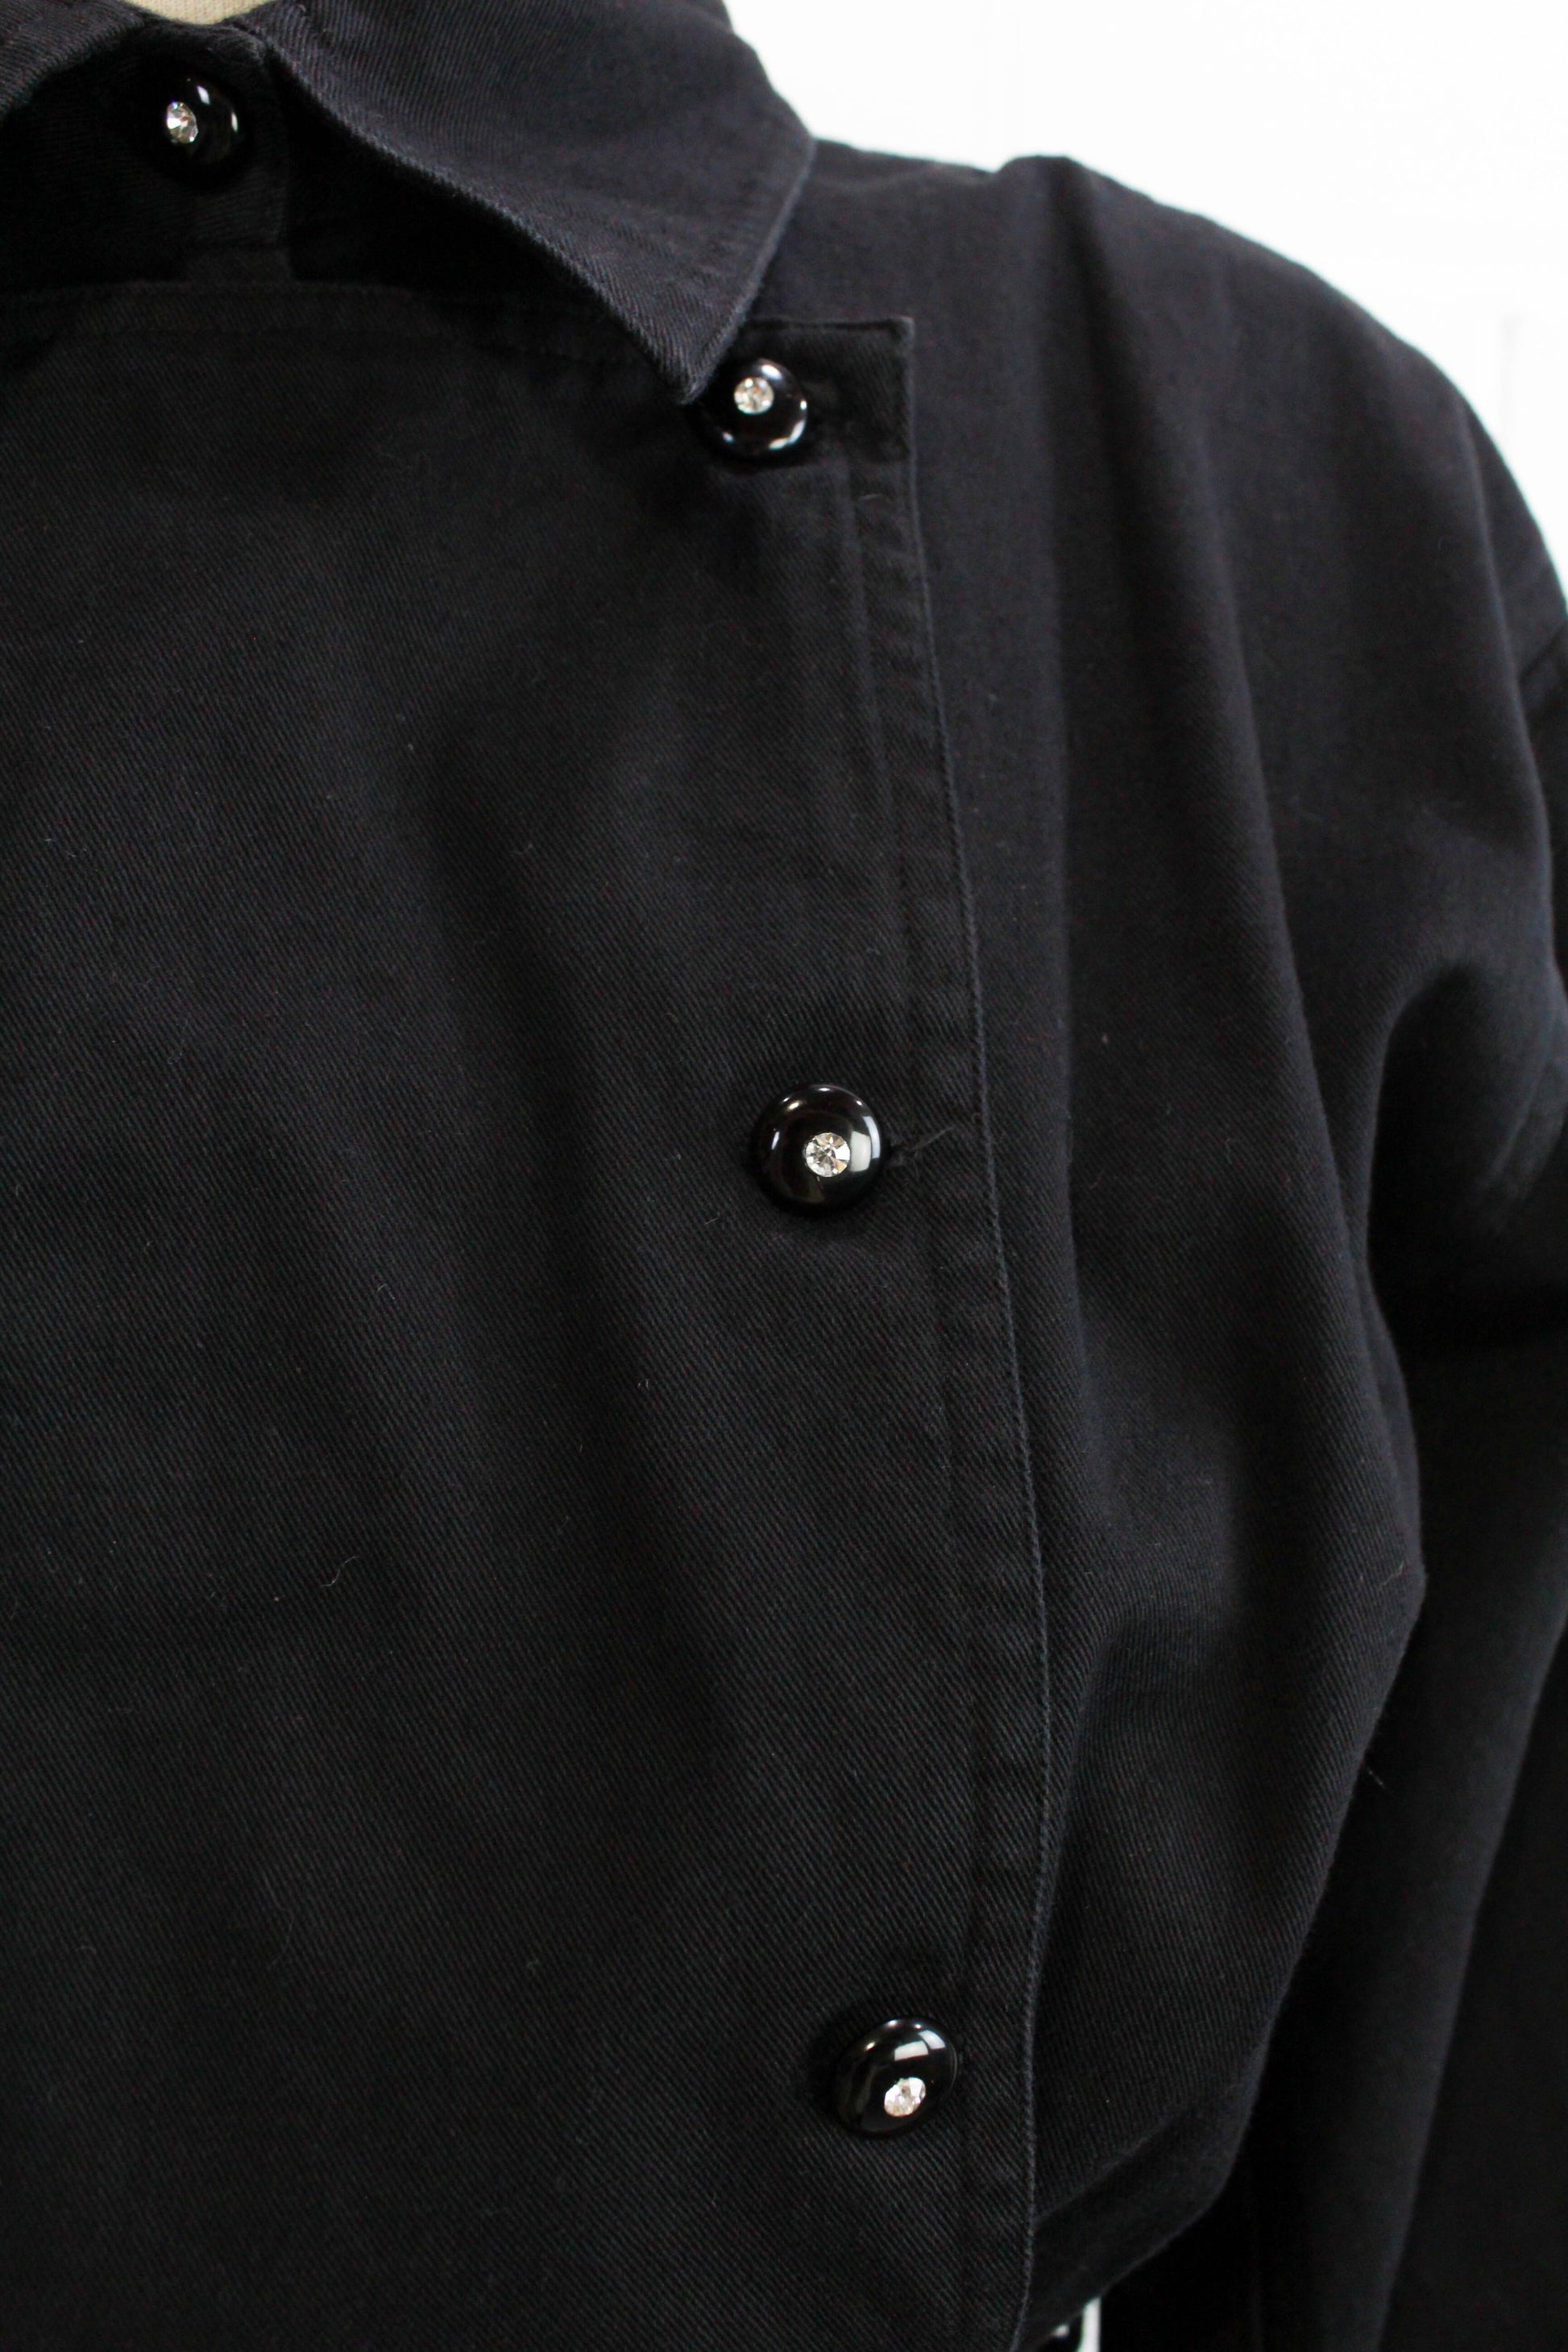 1980s womens jumpsuit black cotton with bib front, collar button up close up rhinestone buttons